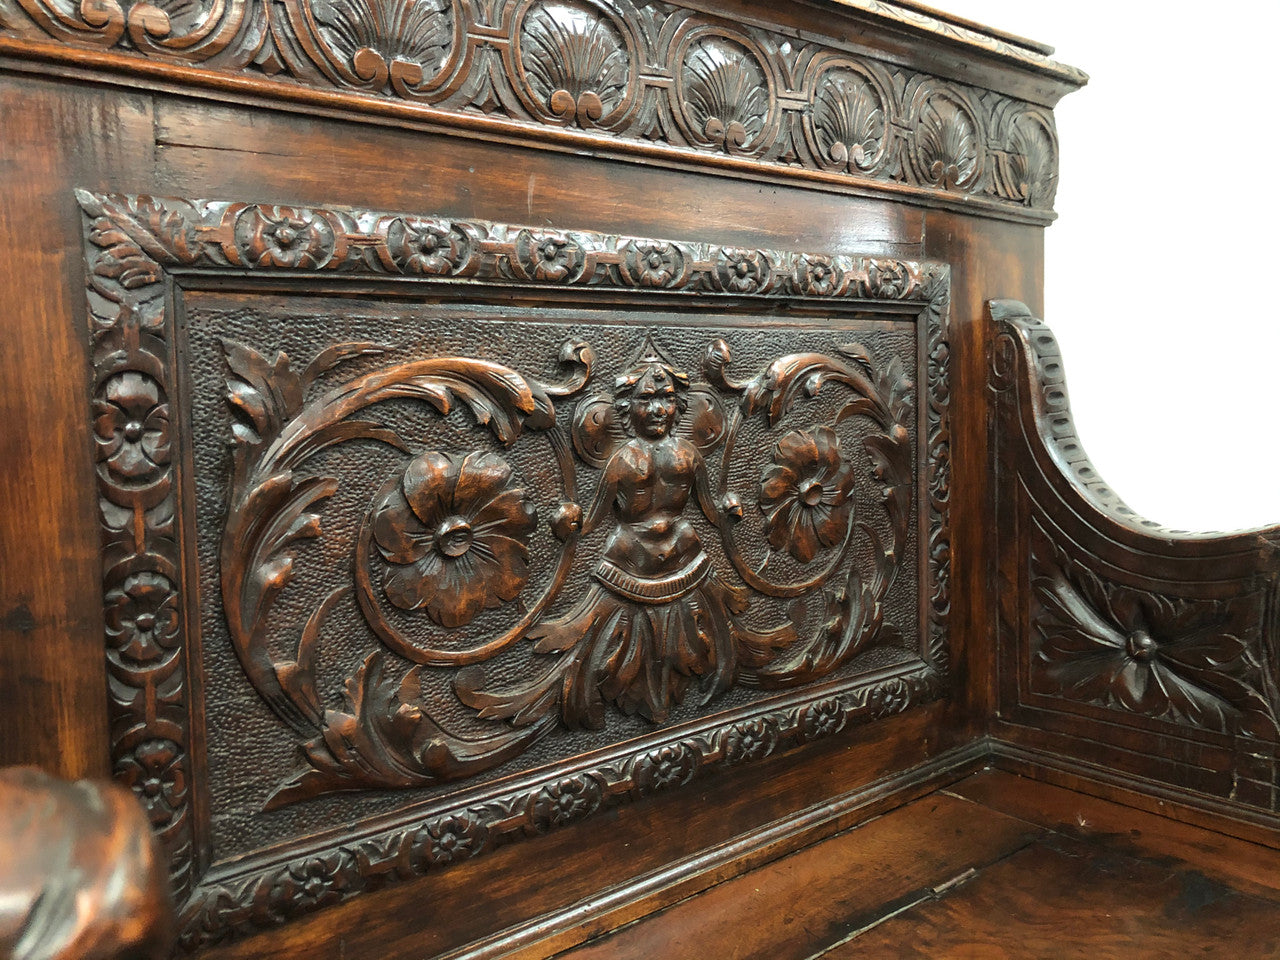 Beautifully carved 19th century gothic style hall seat. The seat lifts up for storage underneath and in very good condition.